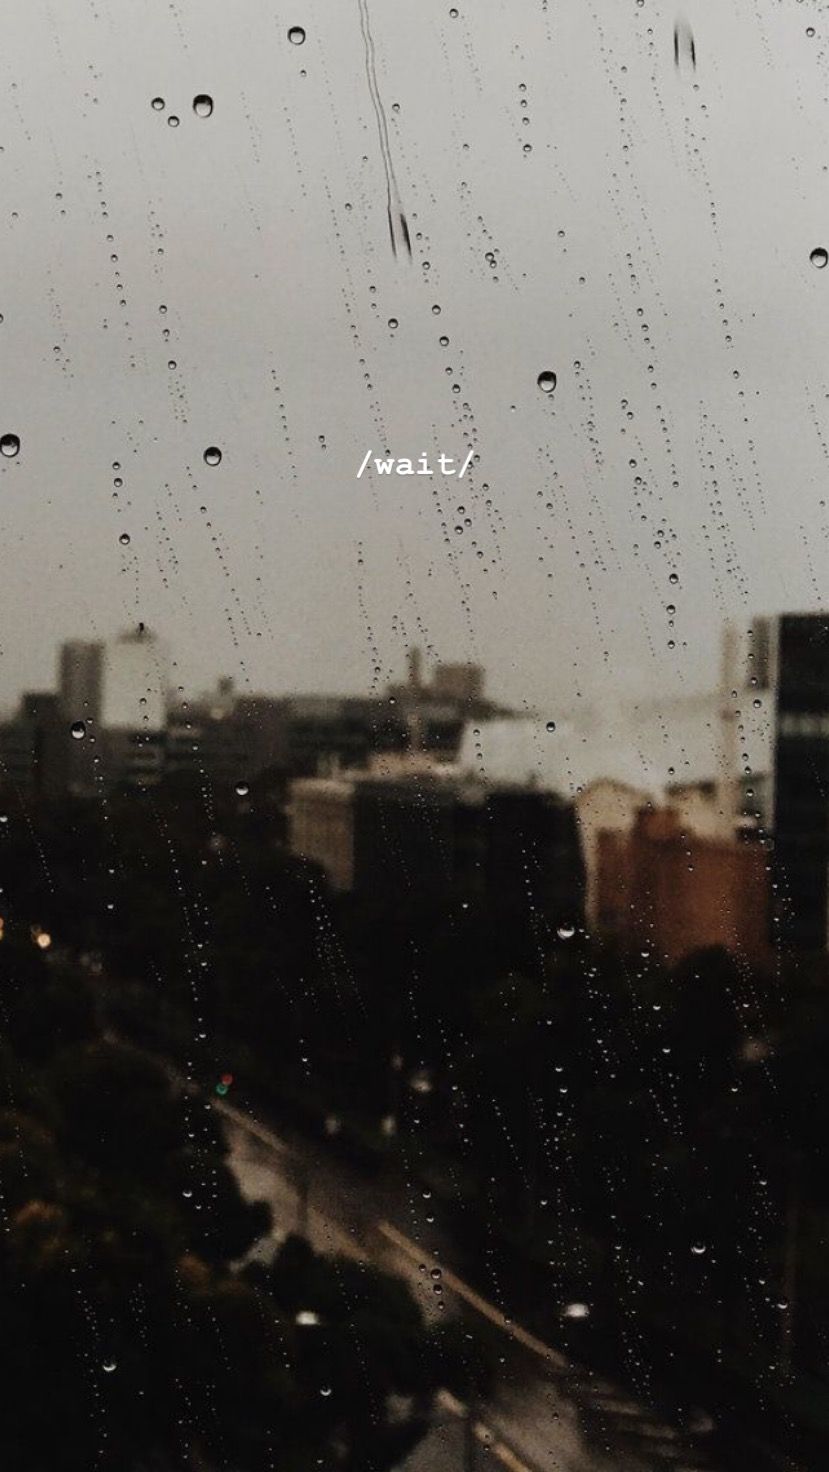 Aesthetic background of a rainy window with the word 